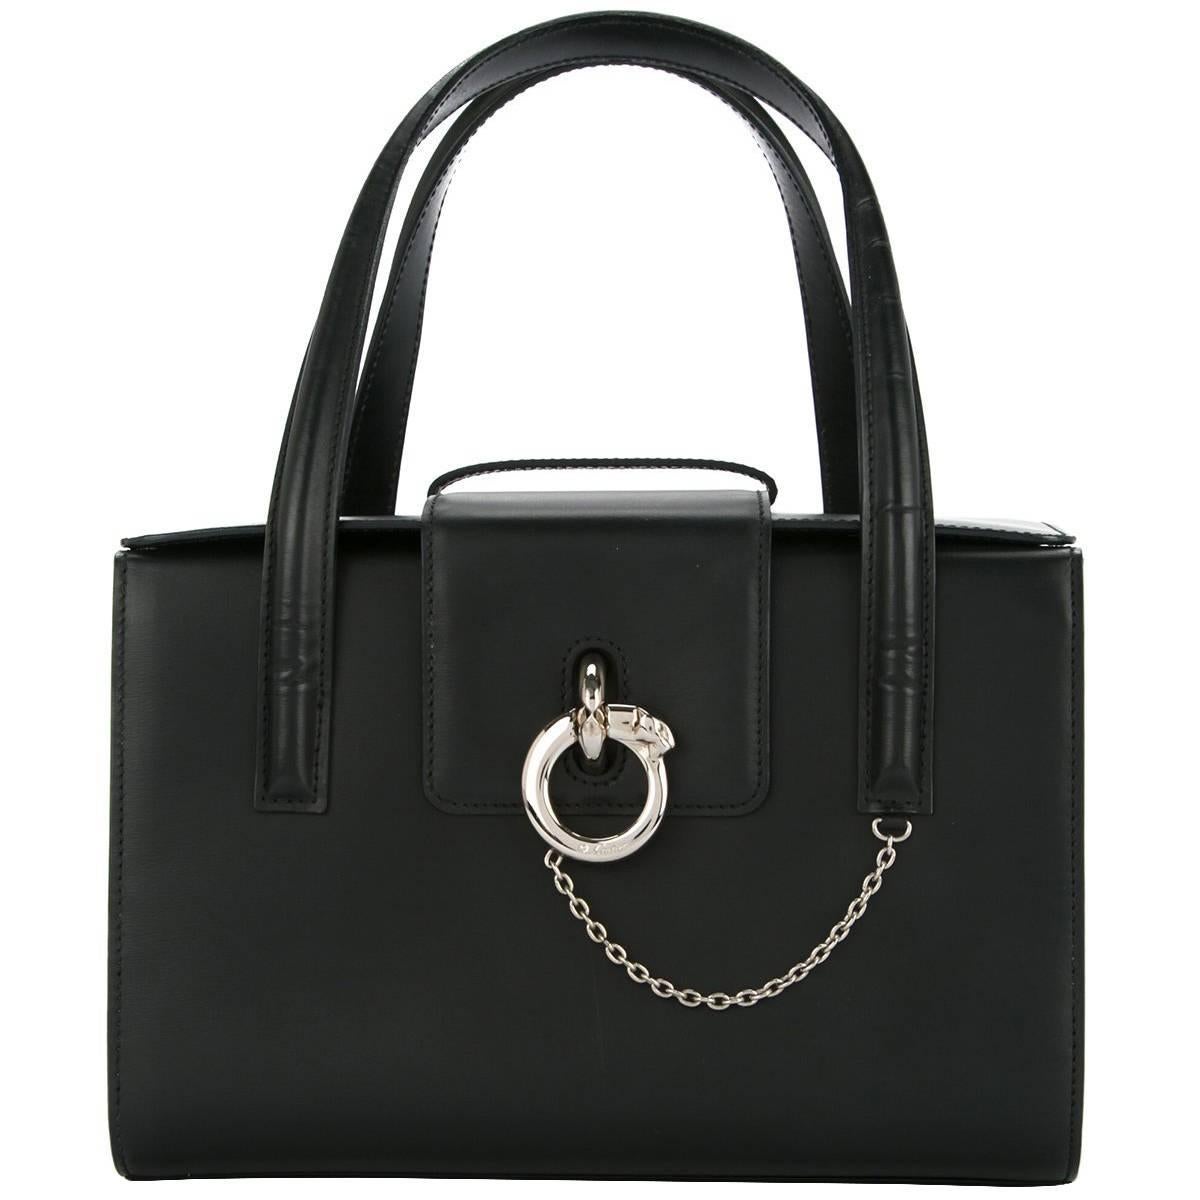 Cartier Black Leather Silver Chain Evening Top Handle Satchel Tote Bag